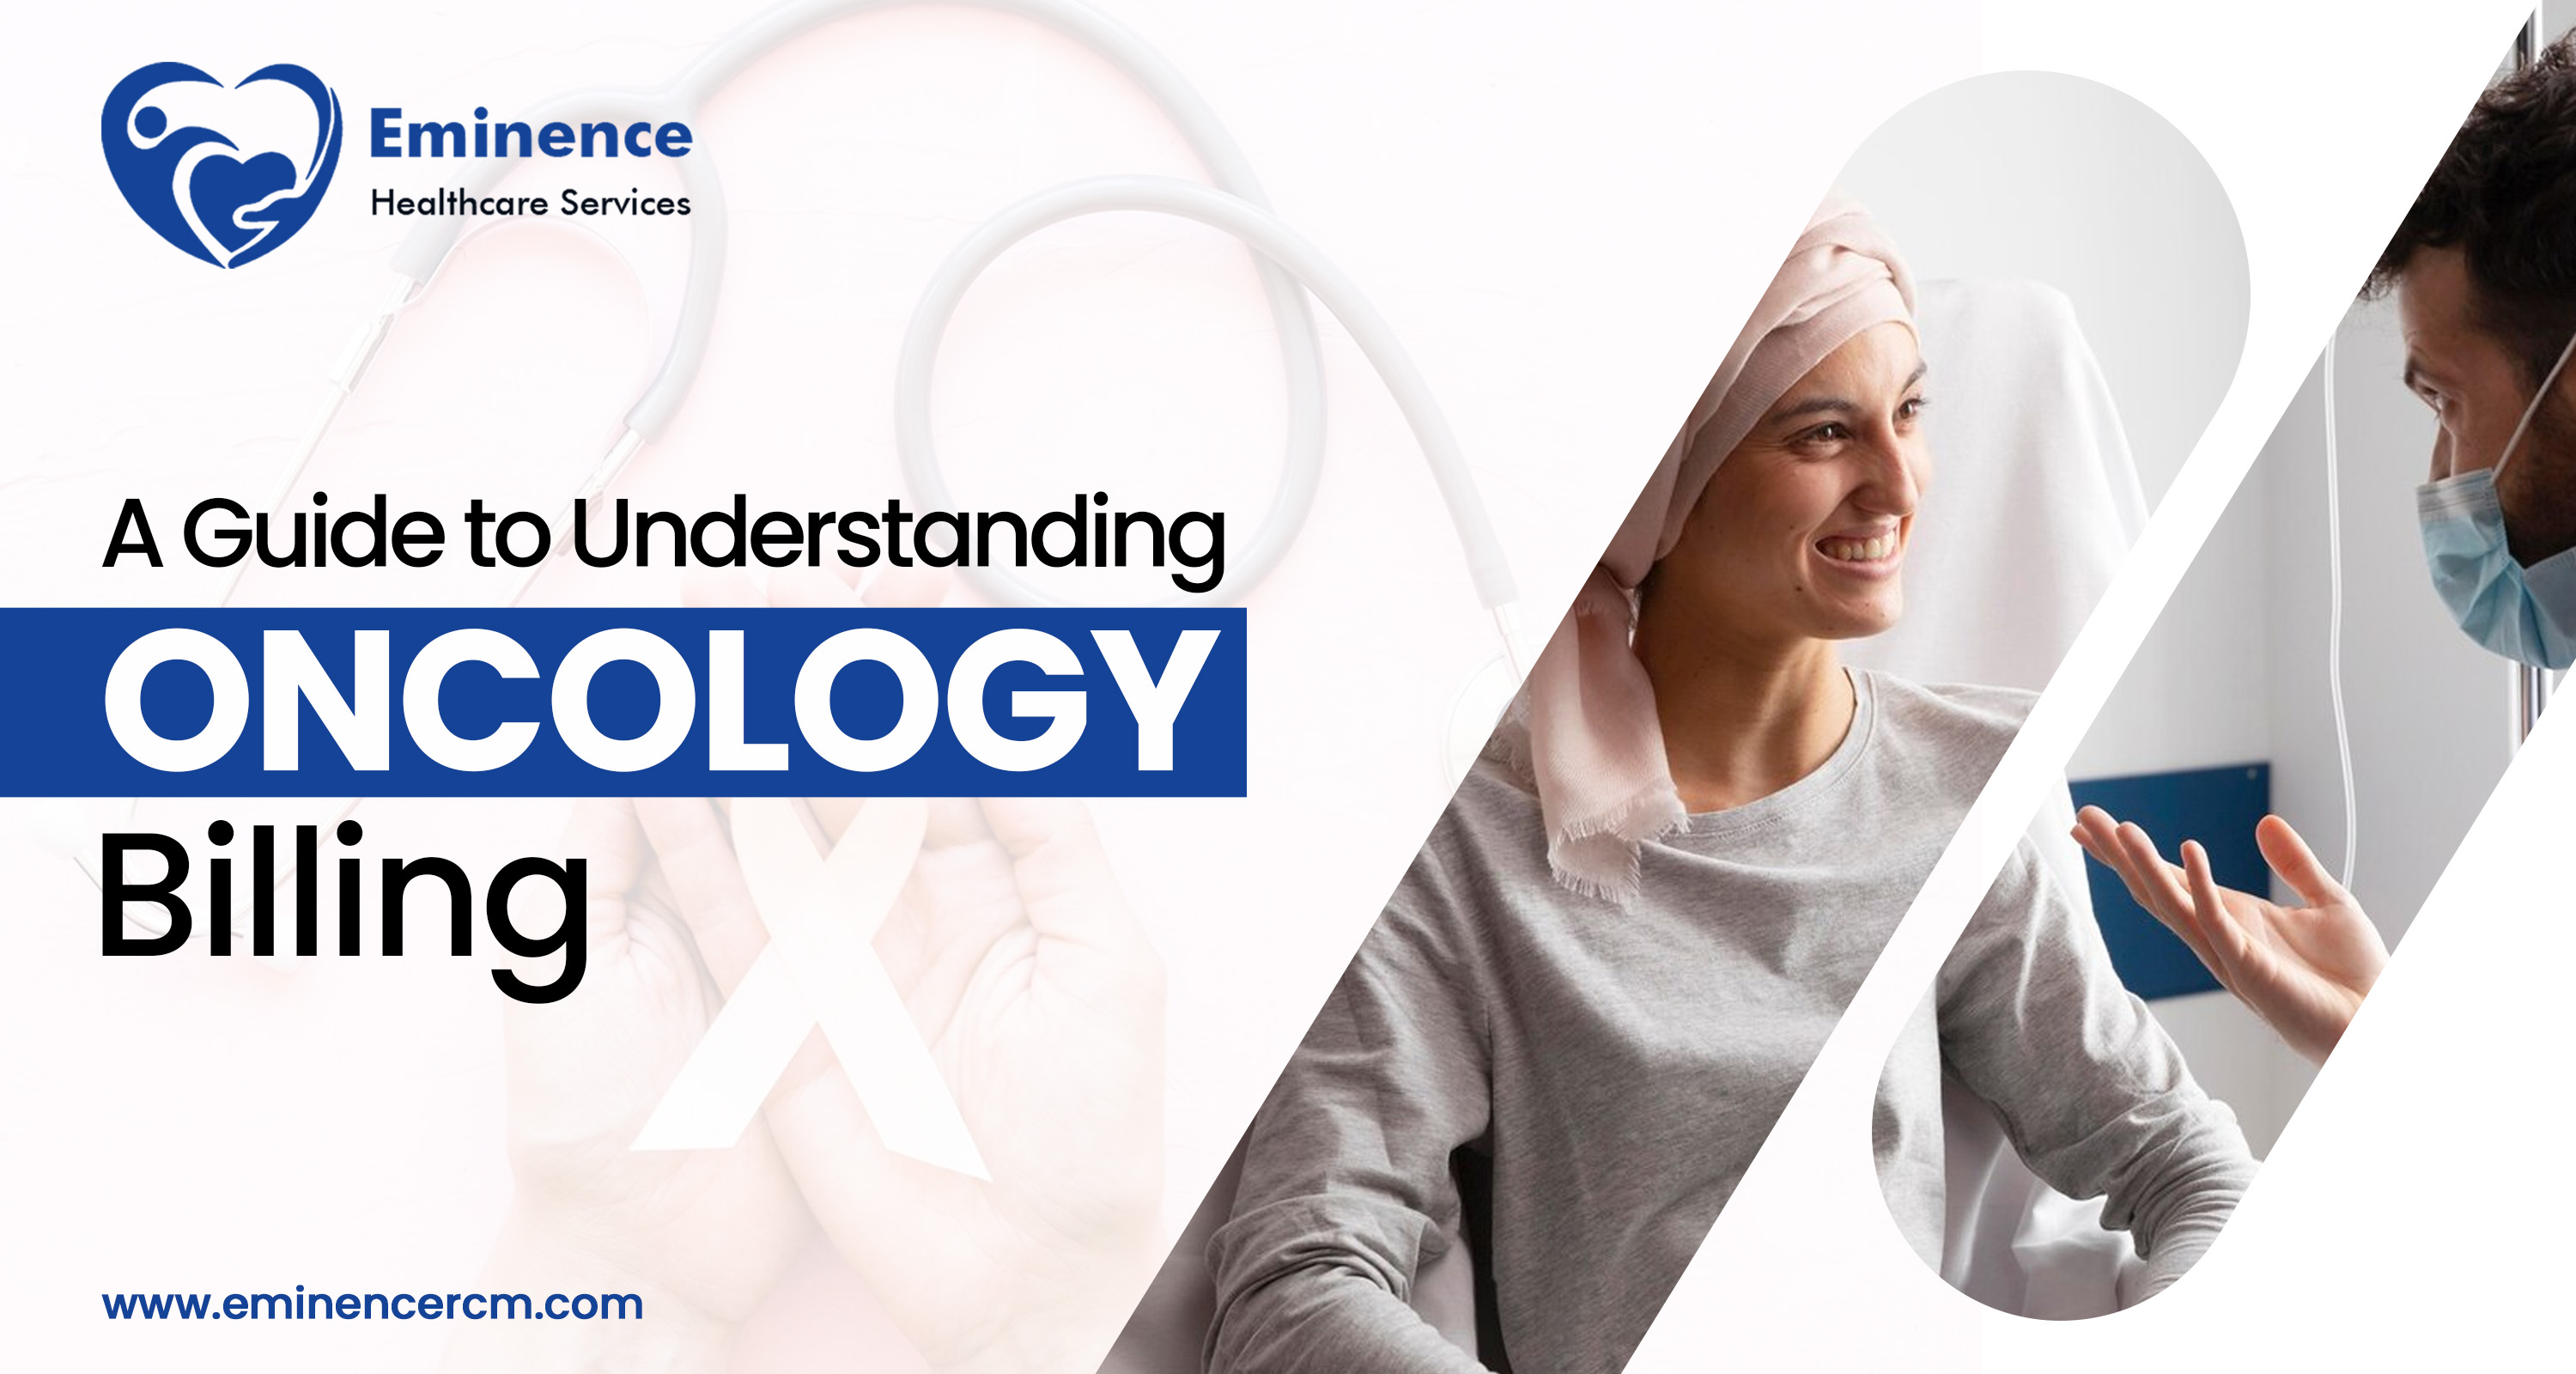 A Guide to Understanding Oncology Billing